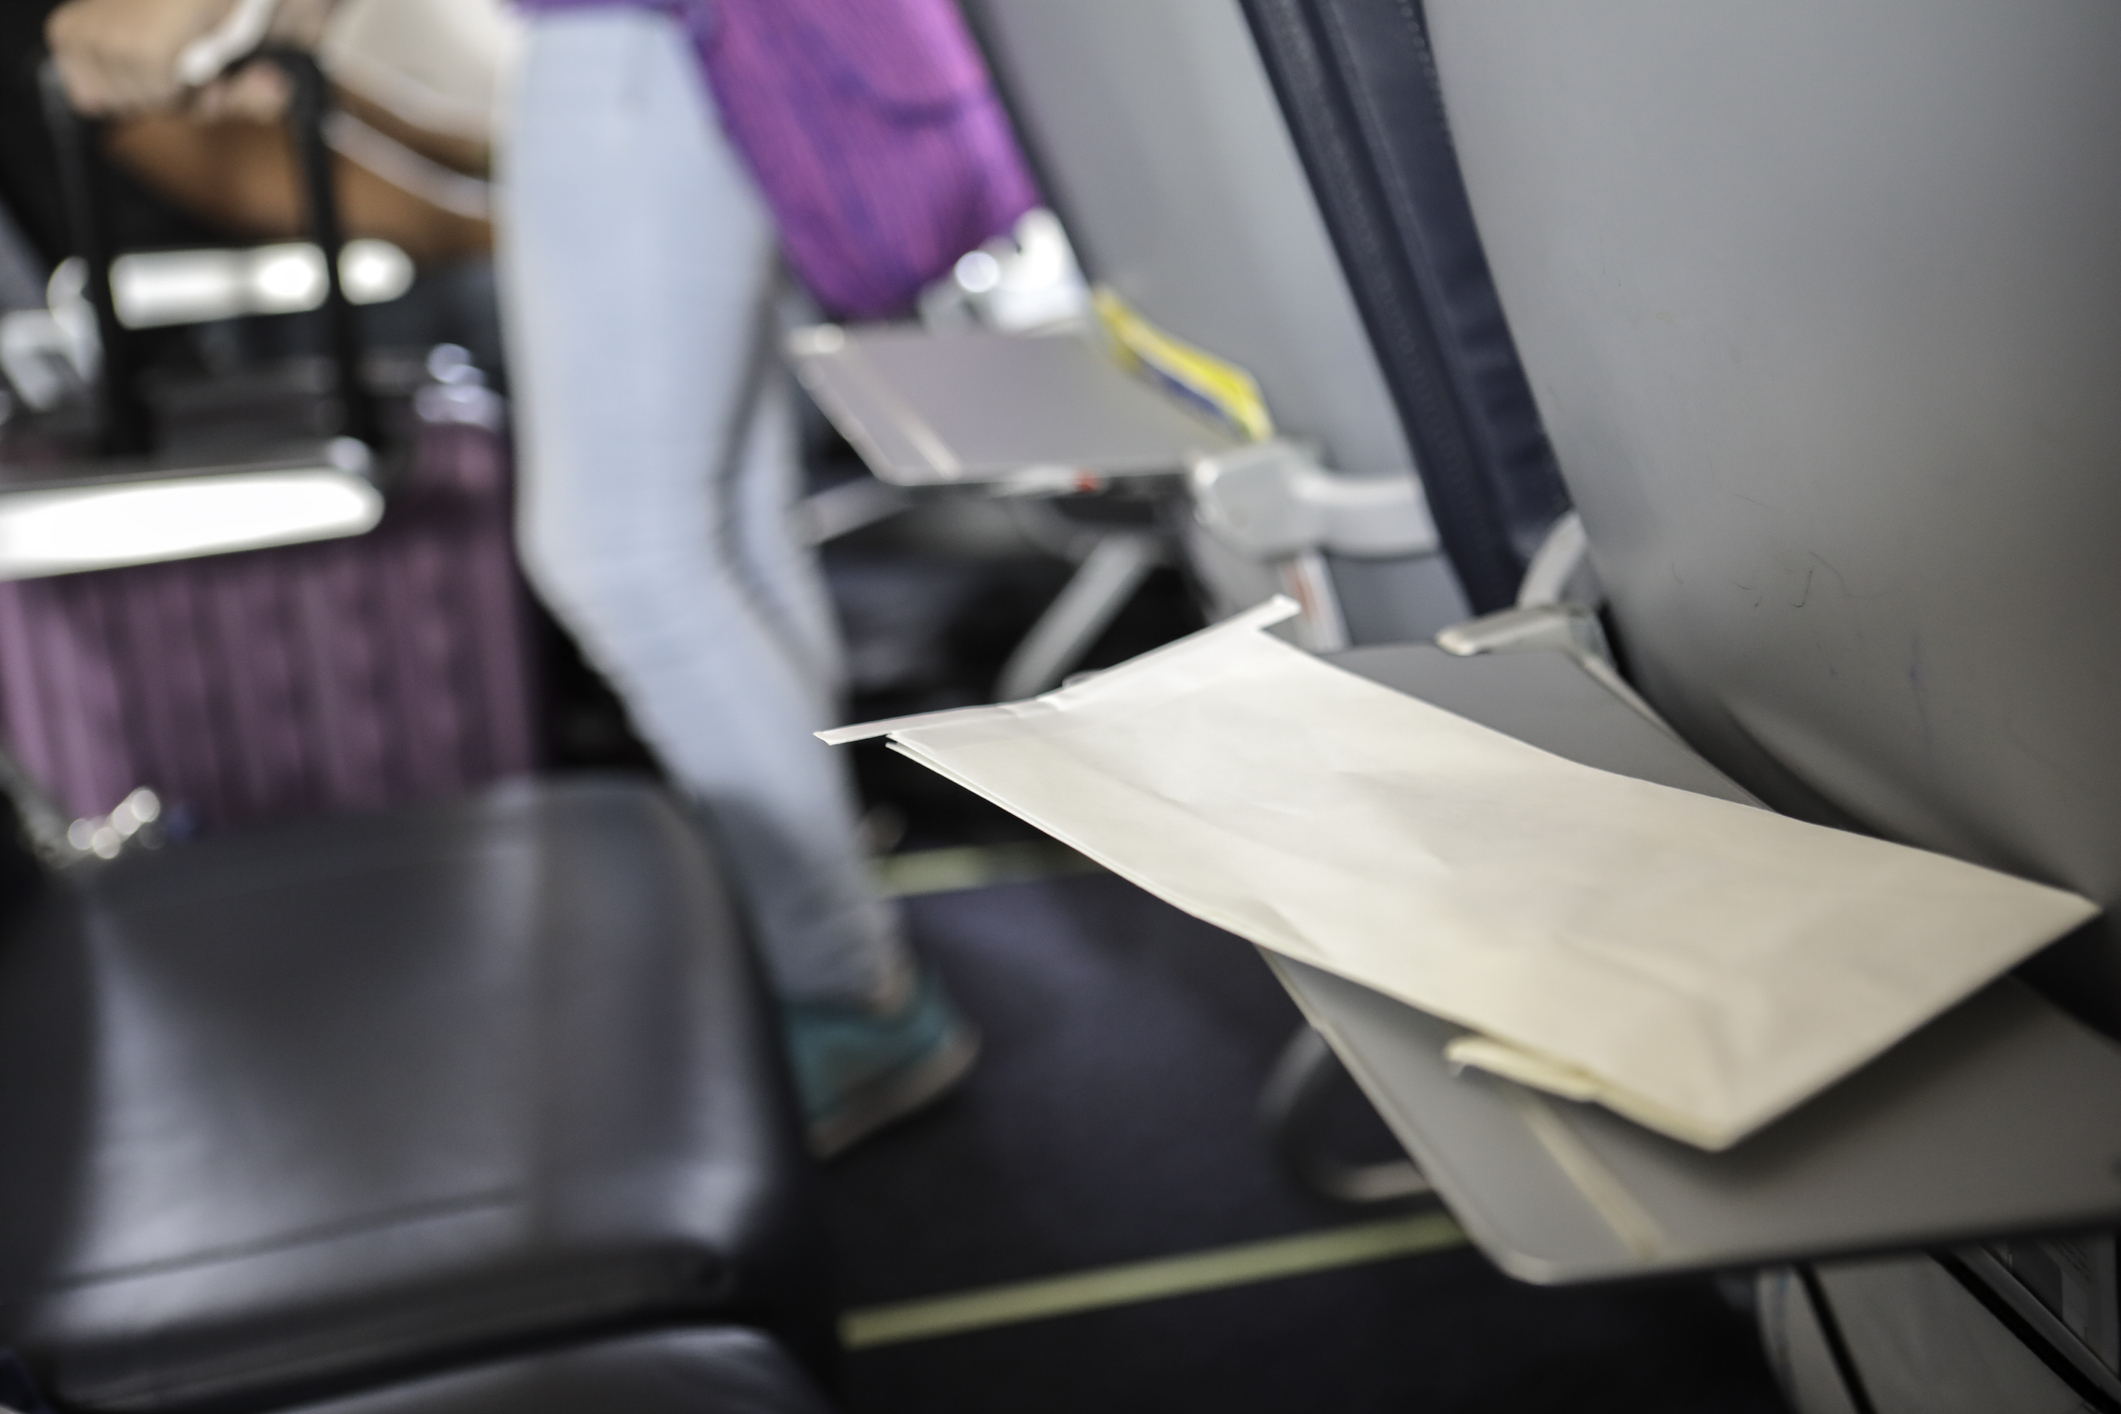 An envelope is lying on a folded down table at an airplane seat, in the background there is another folded down table and a person on the aisle with suitcase.